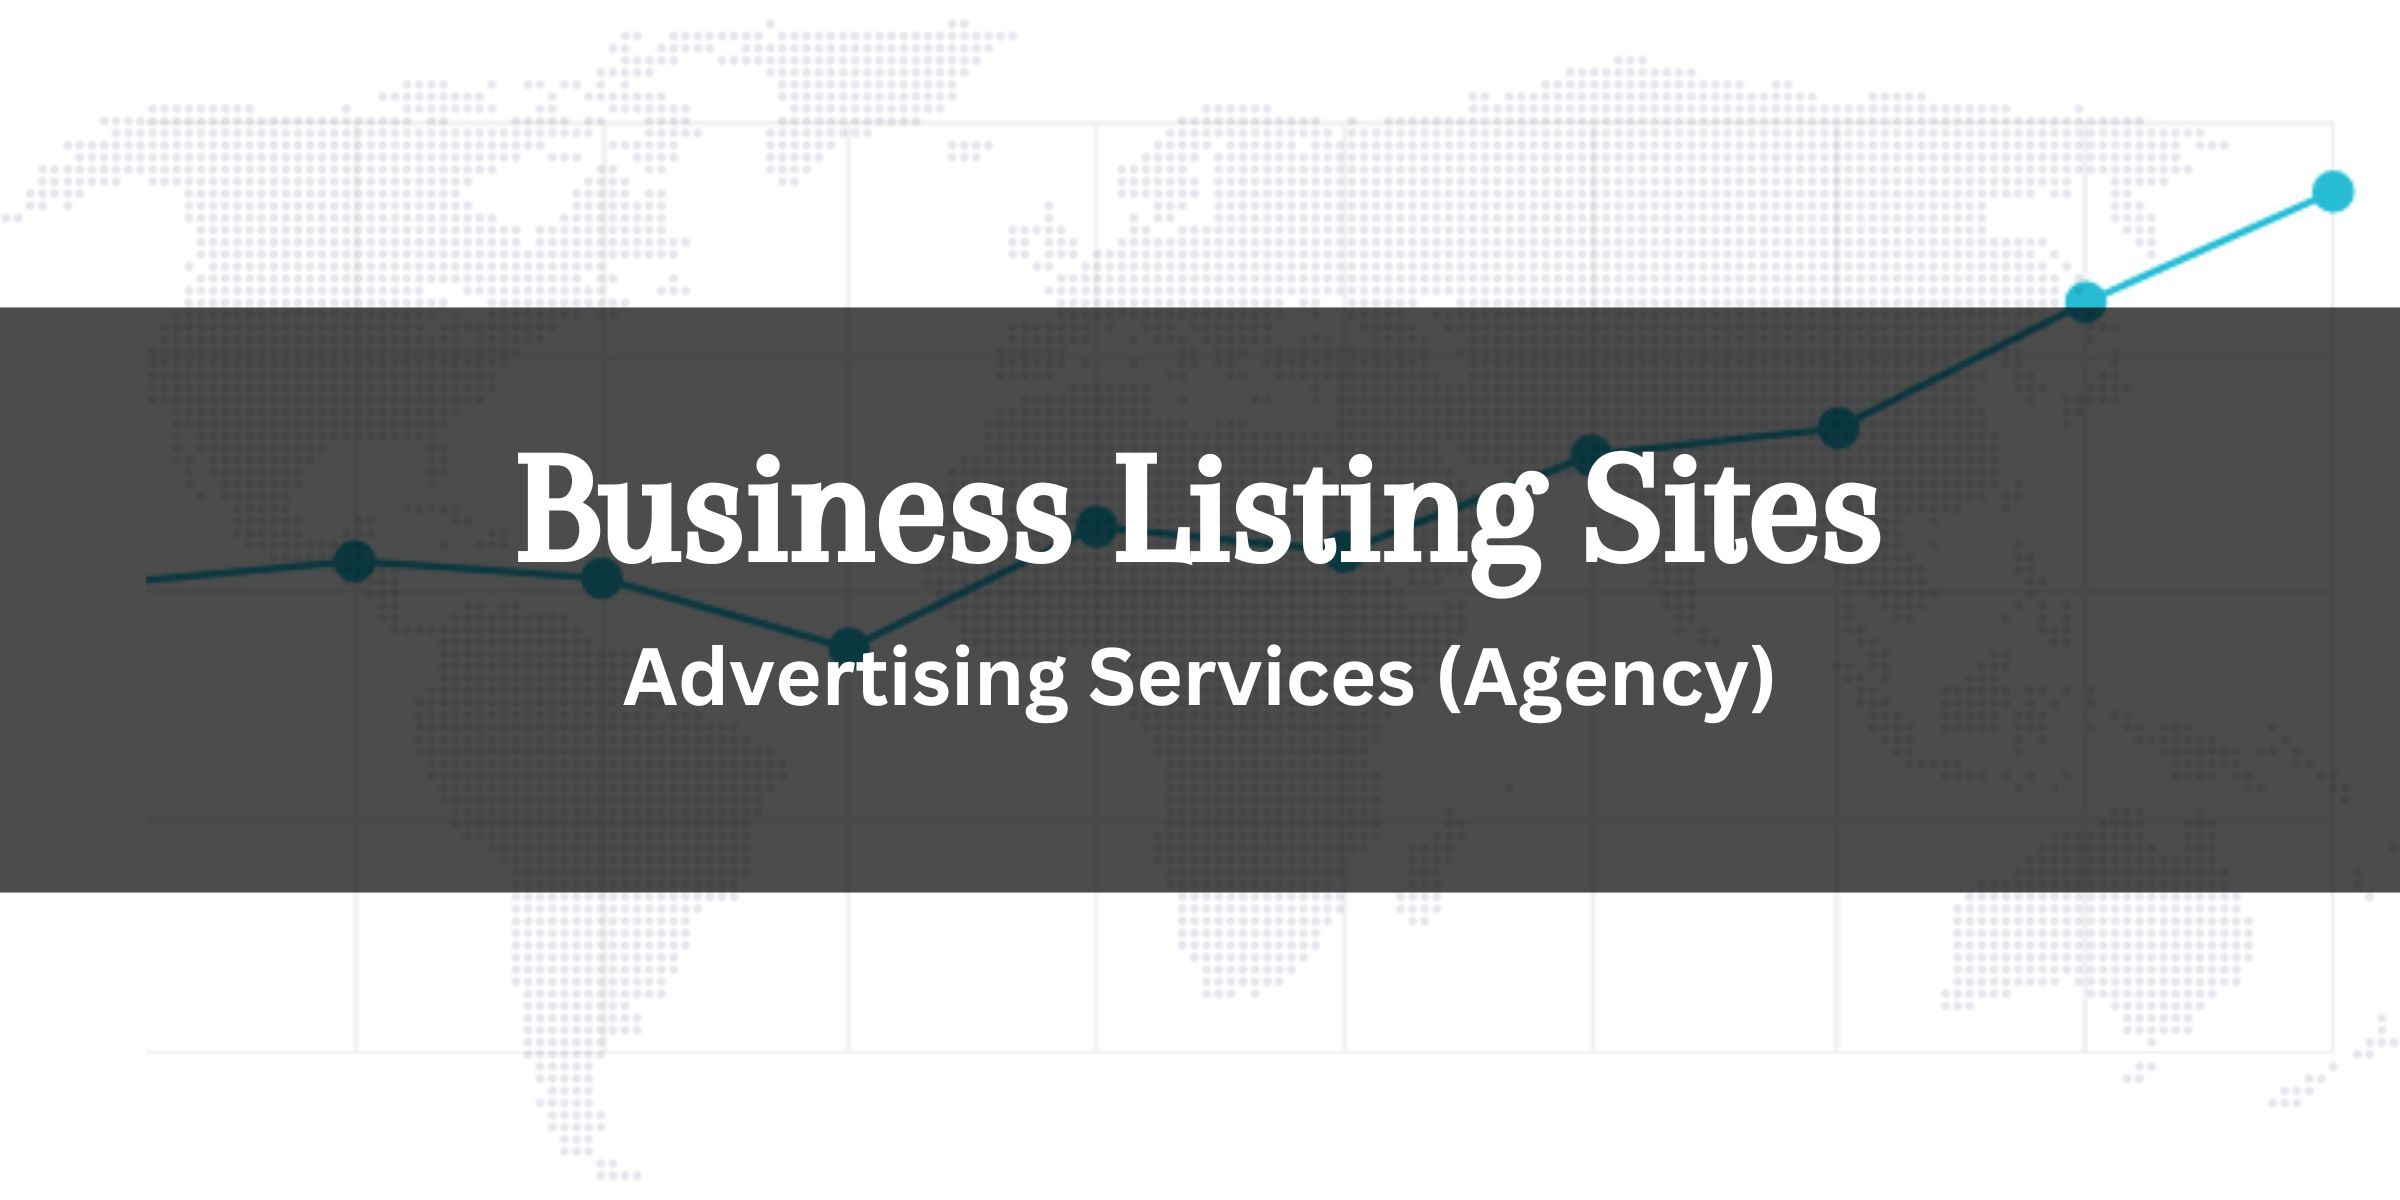 Business Listing Sites Advertising Services